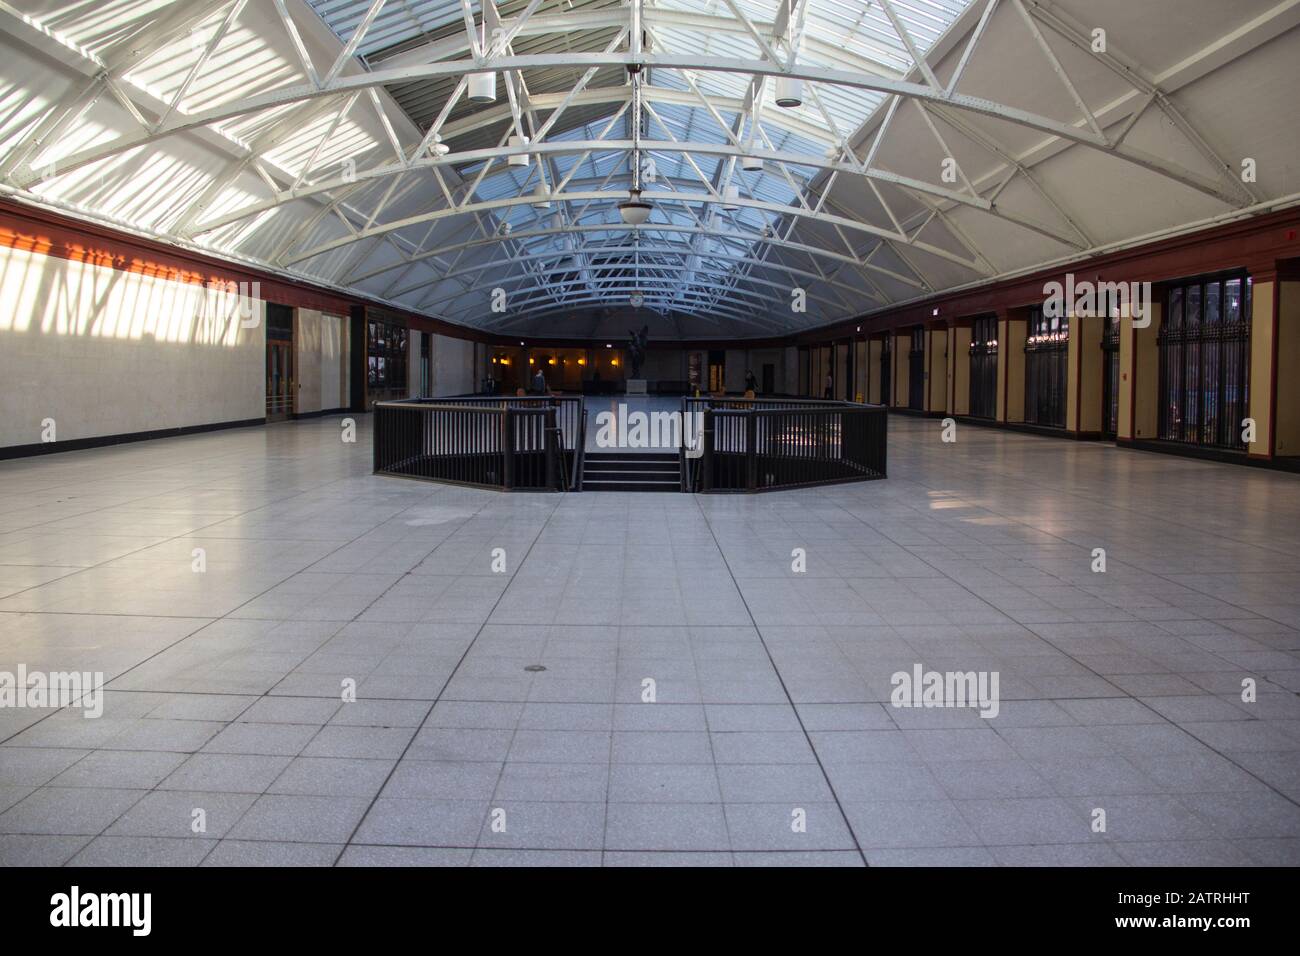 The interior of a former train station Stock Photo